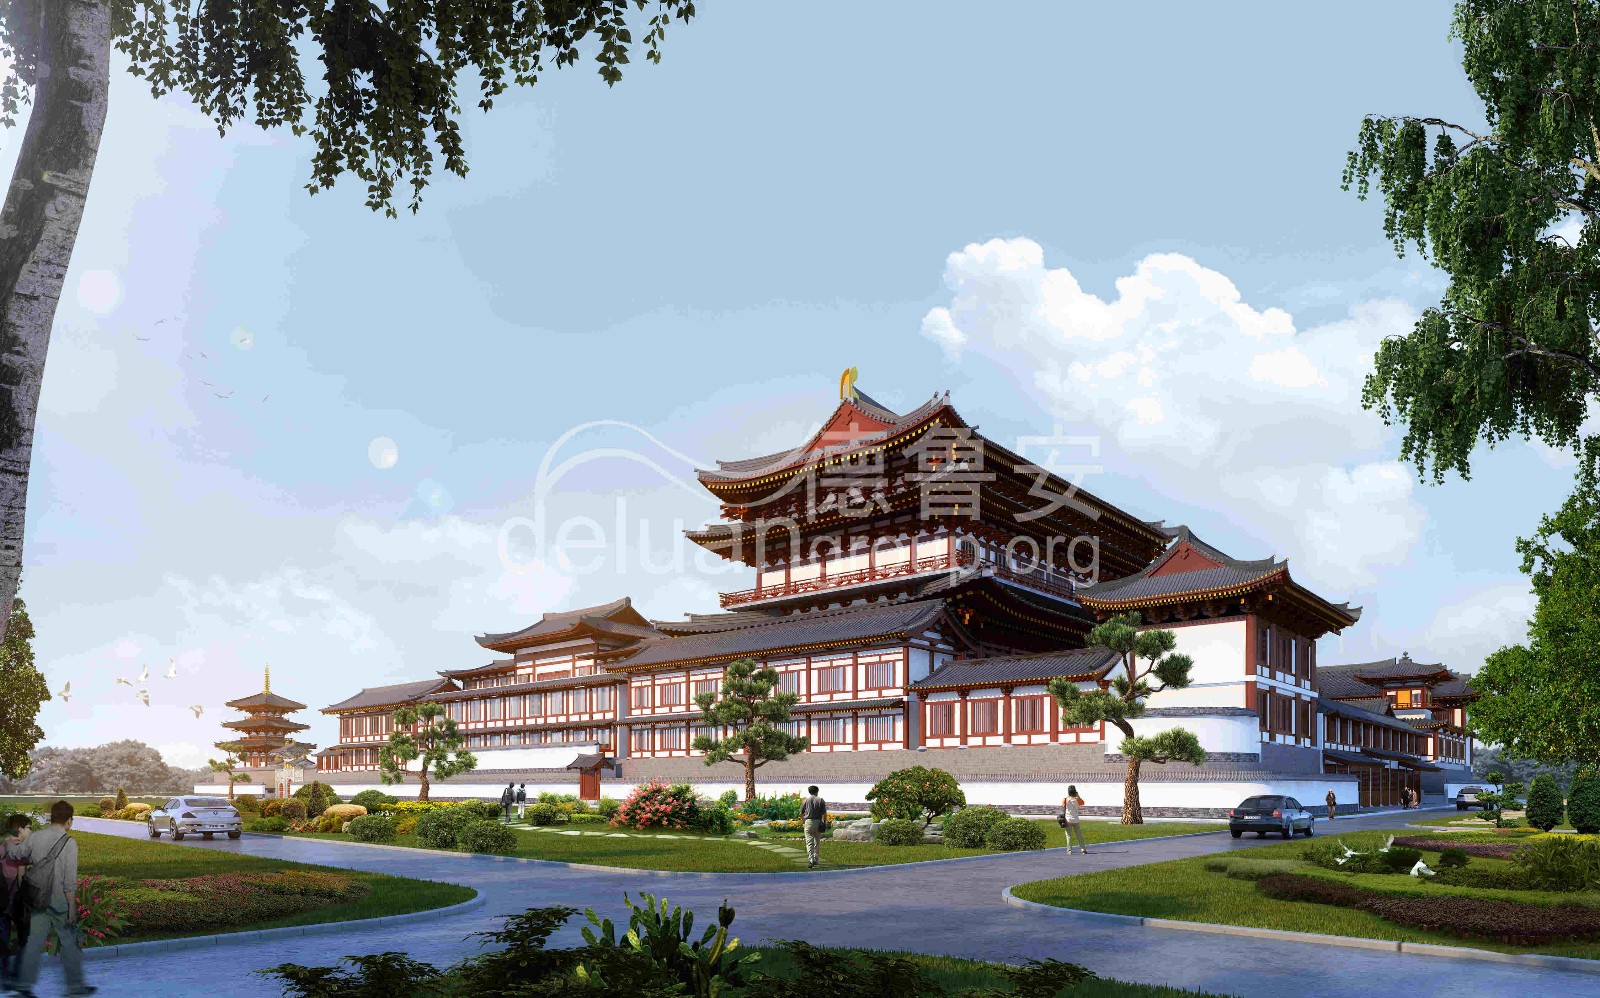 Planning and design of Baoqing temple in Xianghe0(图1)